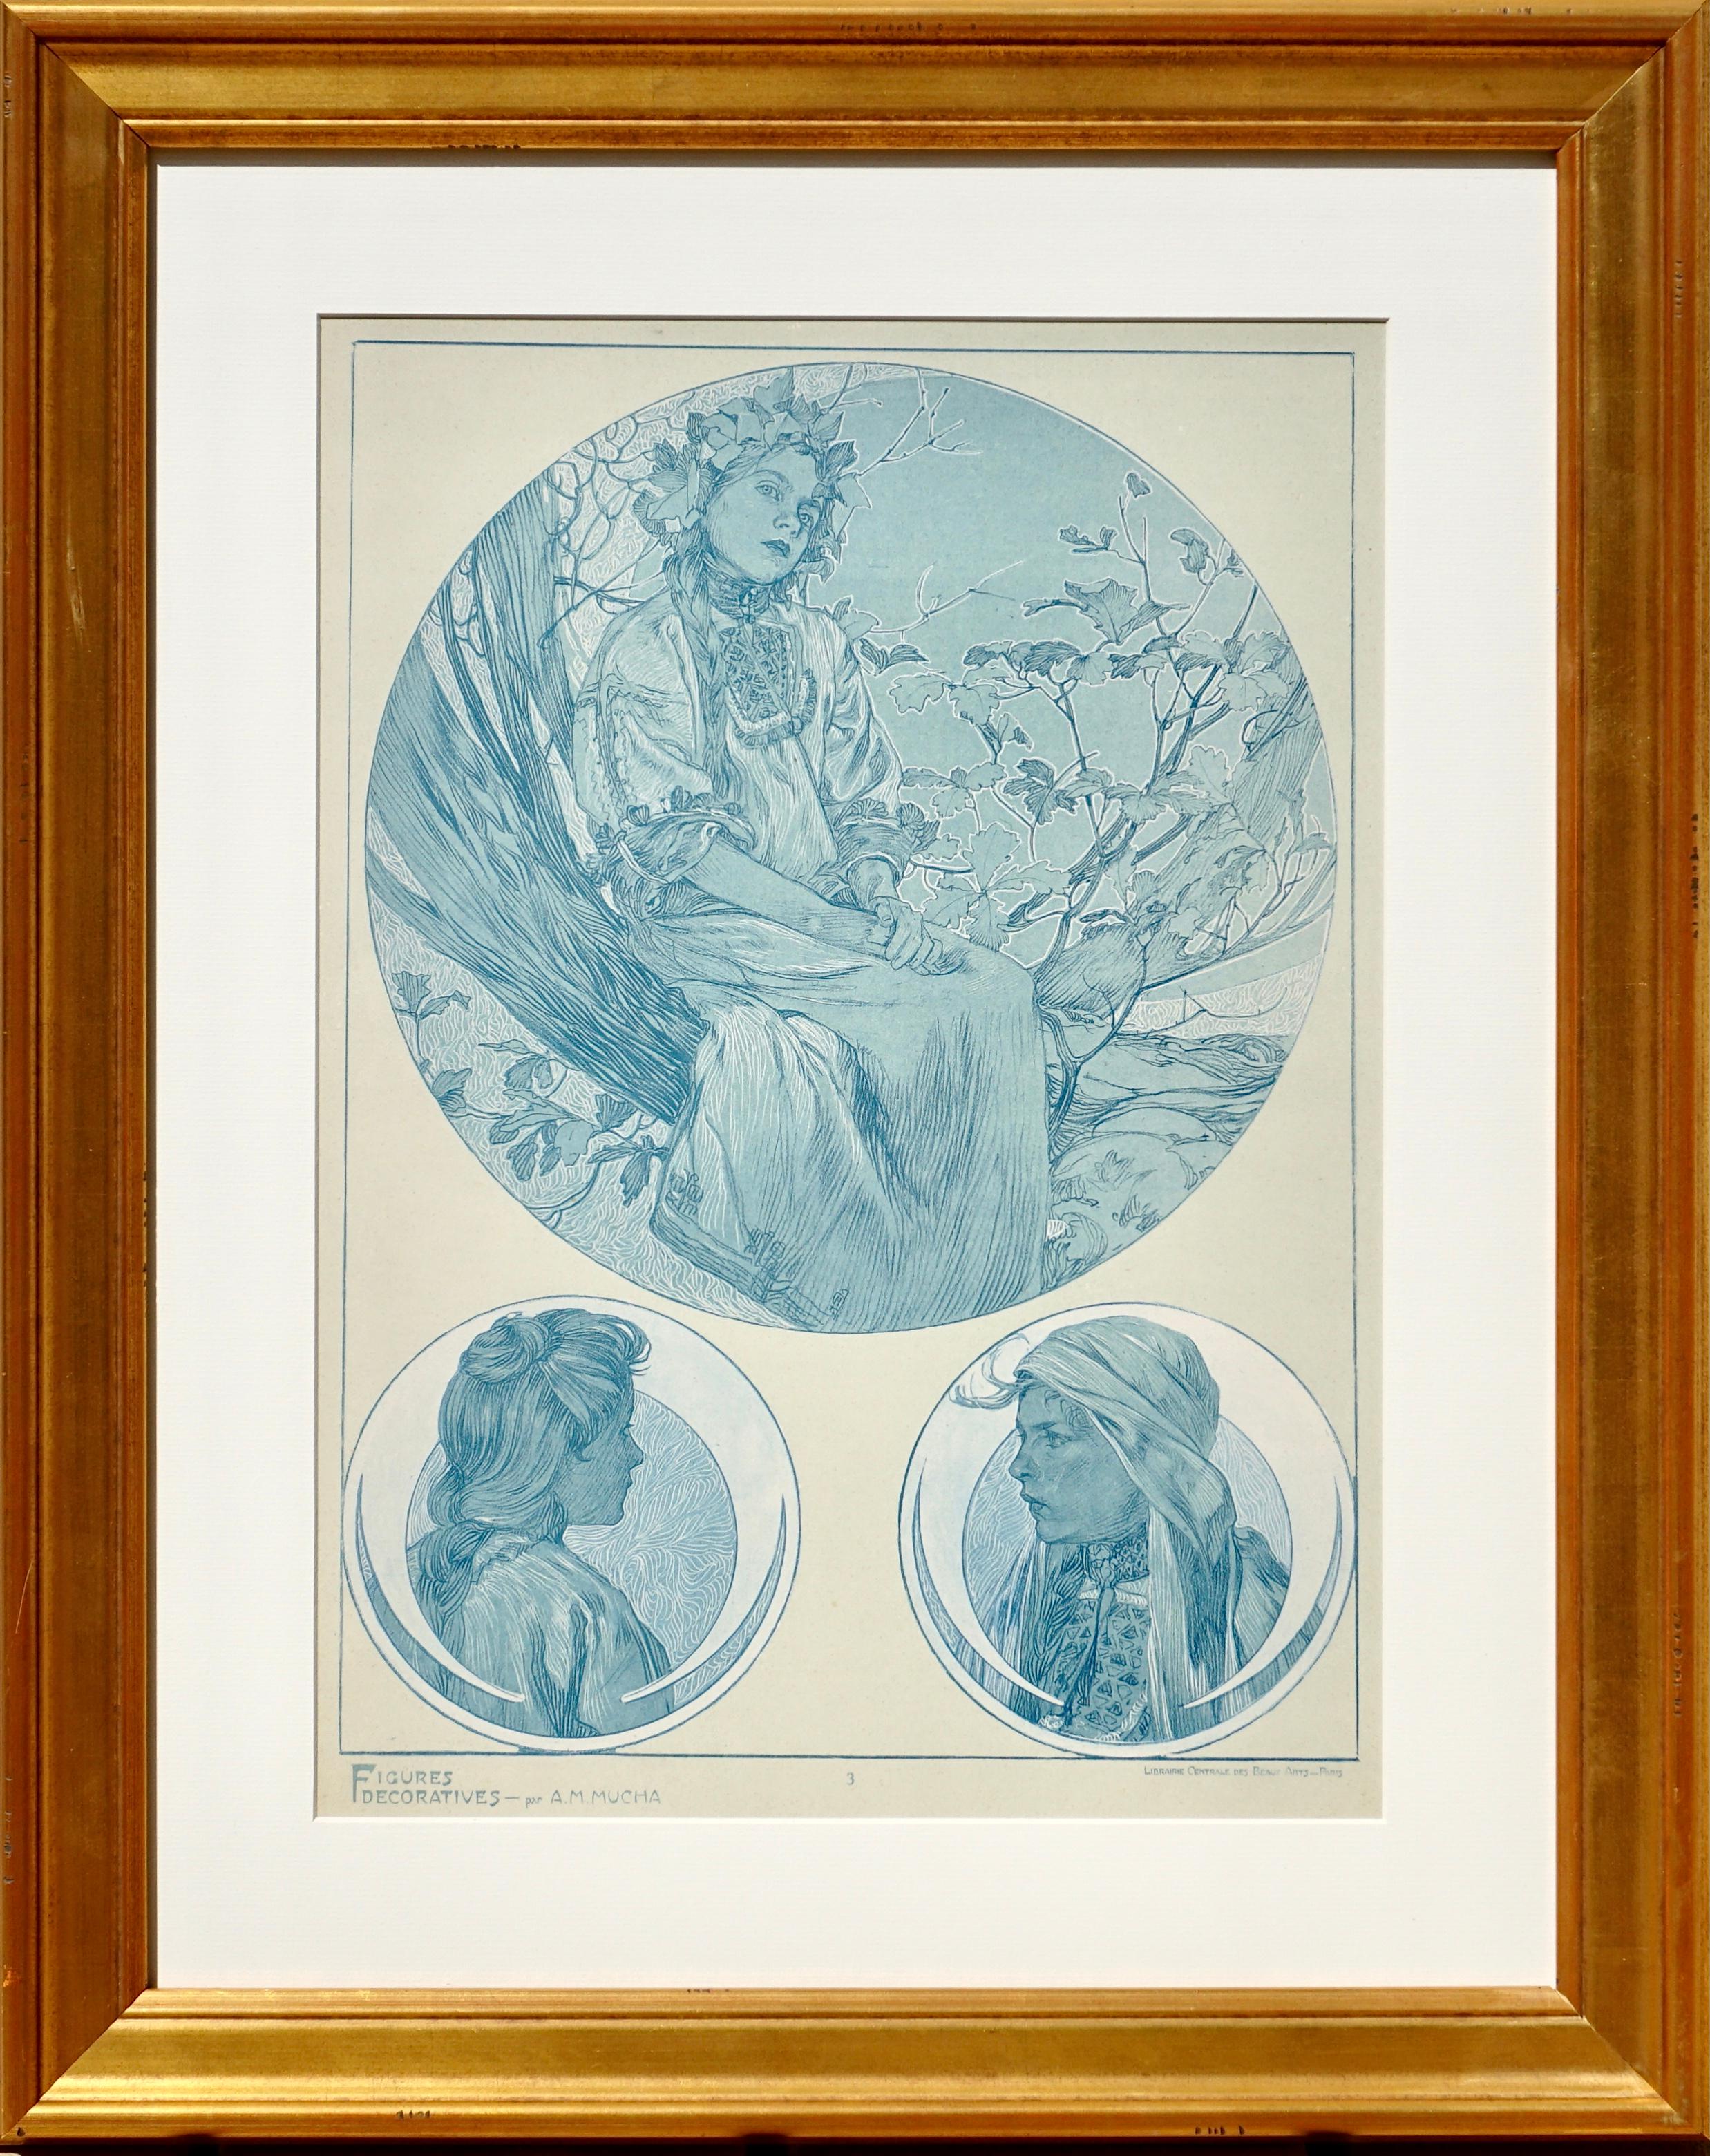 A framed Art Nouveau lithograph collotype poster by Alphone Mucha from 1905 representing the artist’s sketches of nudes, women and beautiful ladies in blues and white pigments on vellum paper. Plate 3 of “Figures Decoratives par A. M. Mucha,”